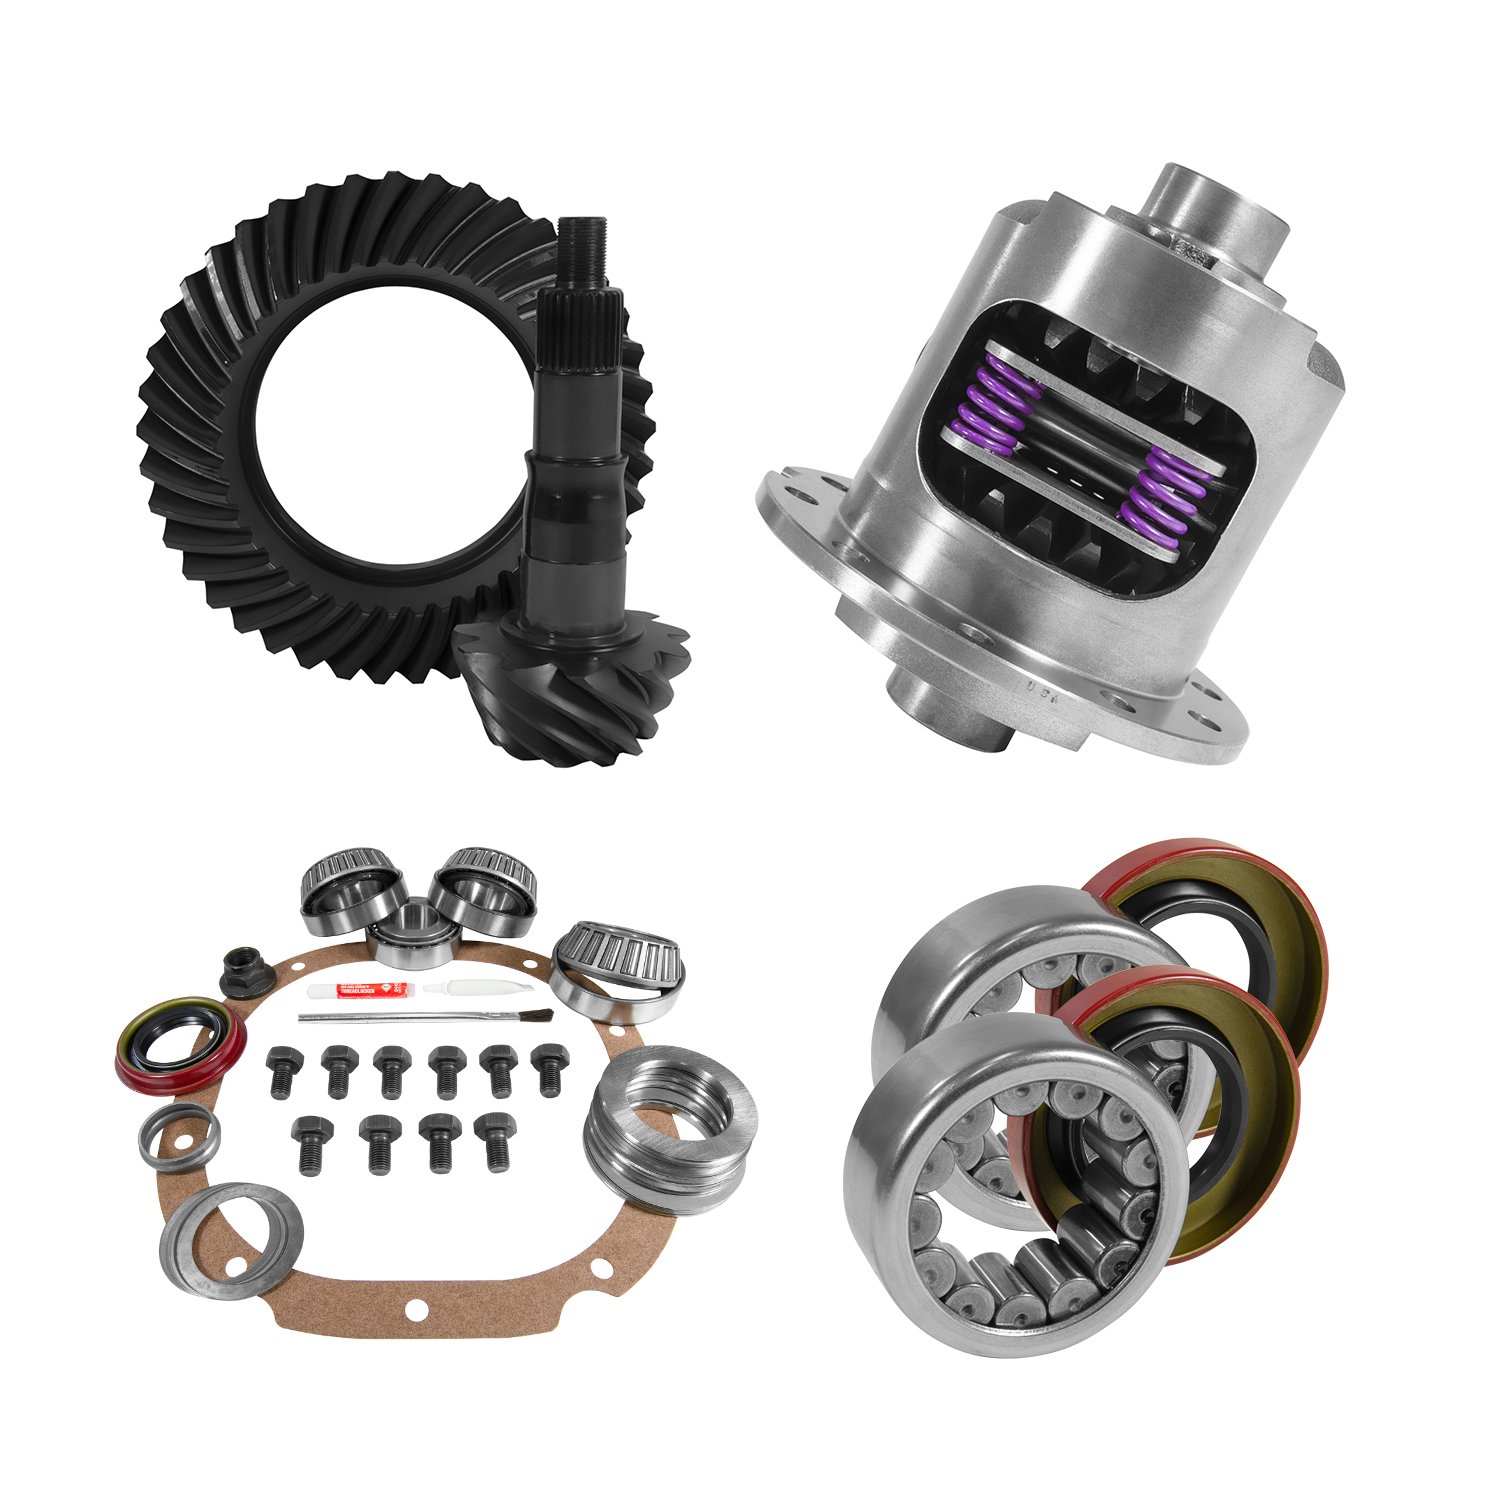 USA Standard 10773 8.8 in. Ford 4.11 Rear Ring & Pinion Install Kit, 31Spl Posi, 2.99 in. Axle Bearings